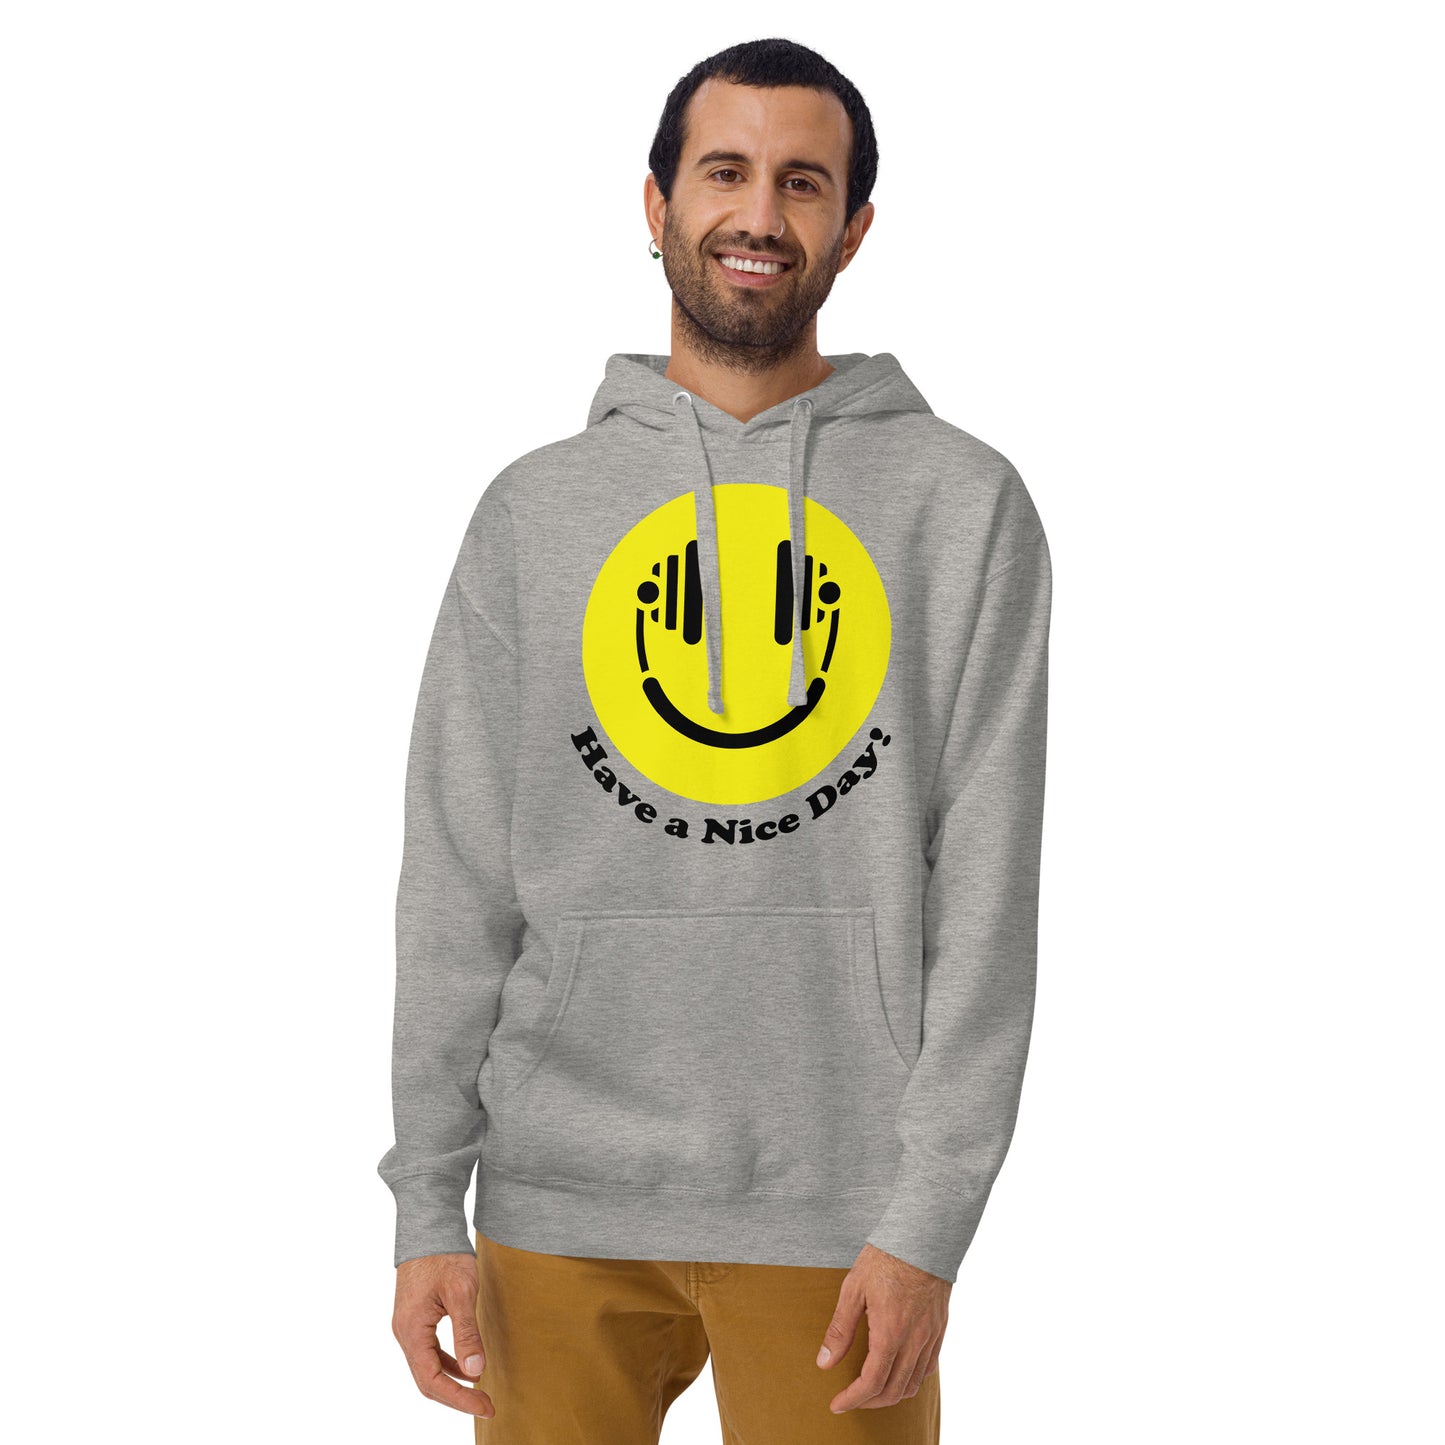 Have a Nice Day! - Throwback Hoodie!